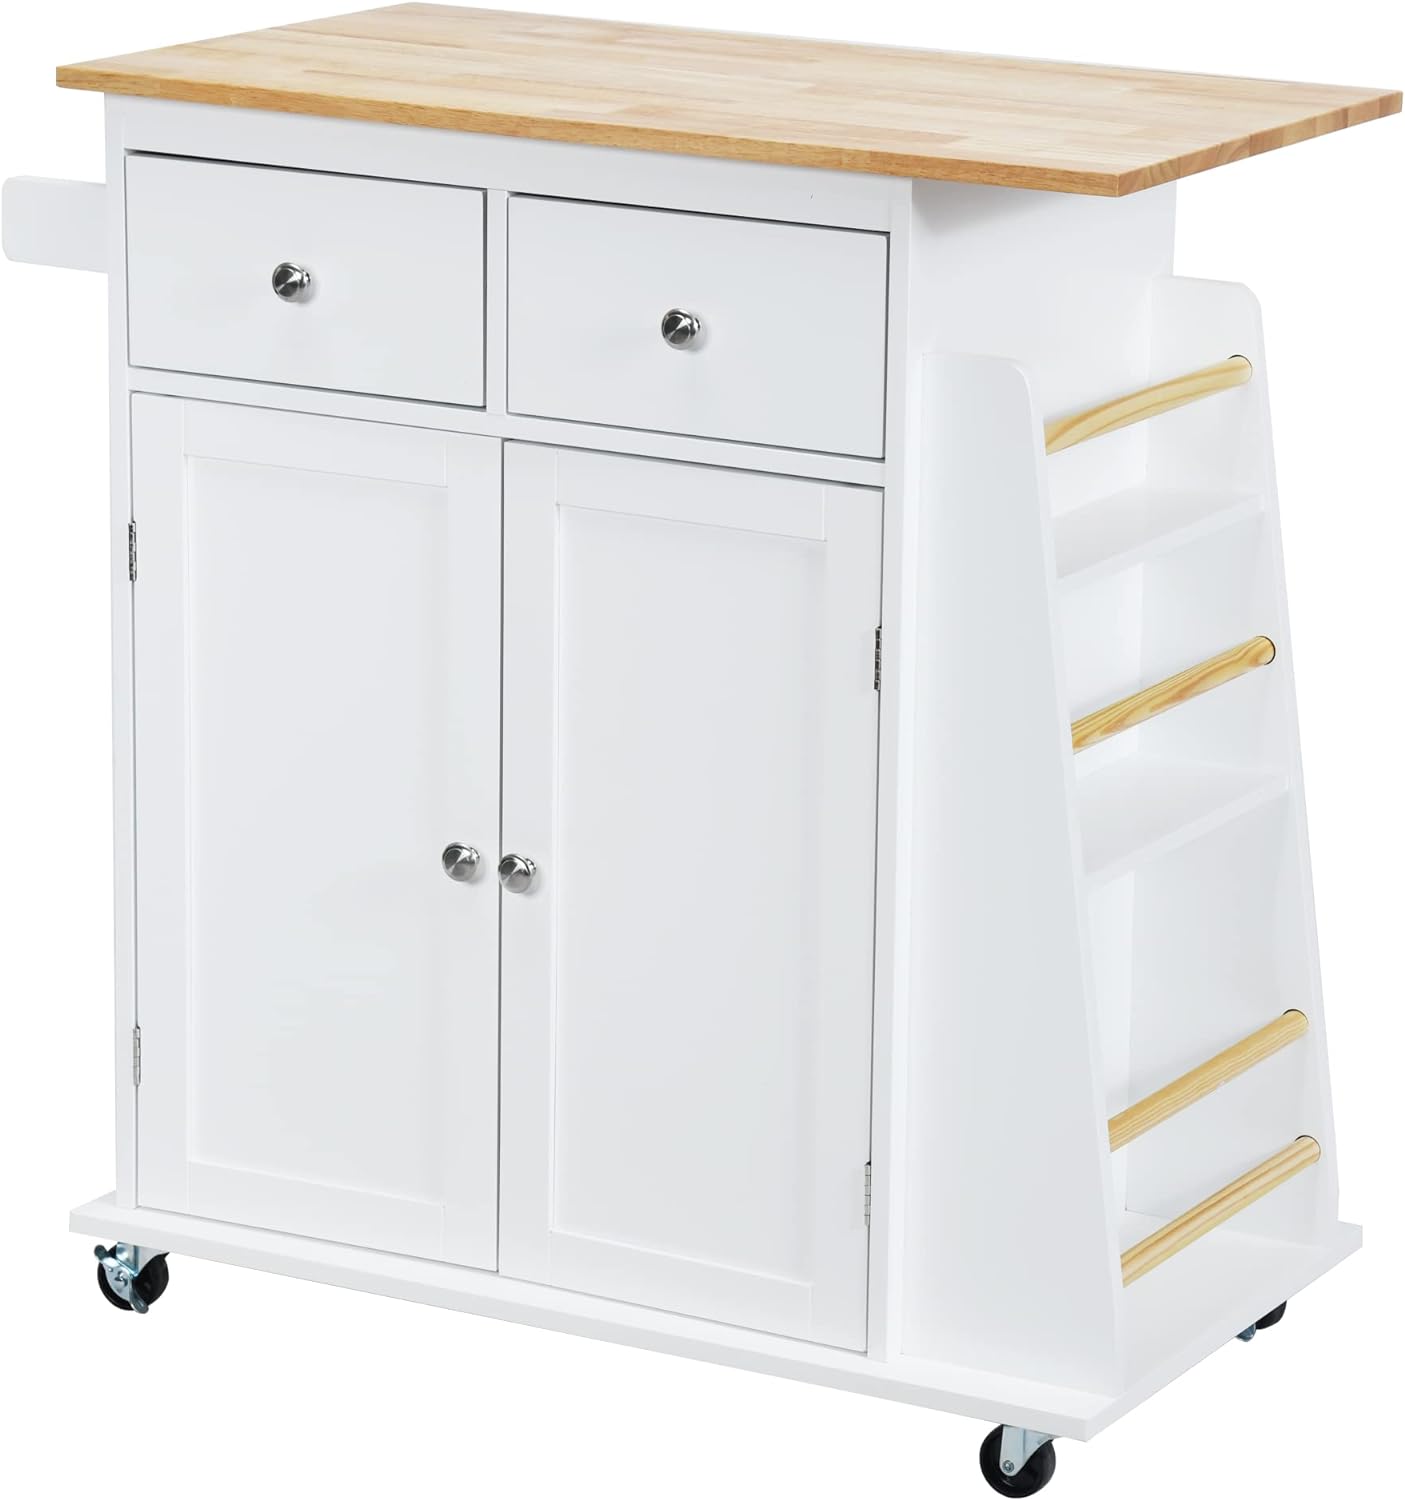 Easy to move Sufficient storage cabinets The top table can be used to cut vegetables.Very practical